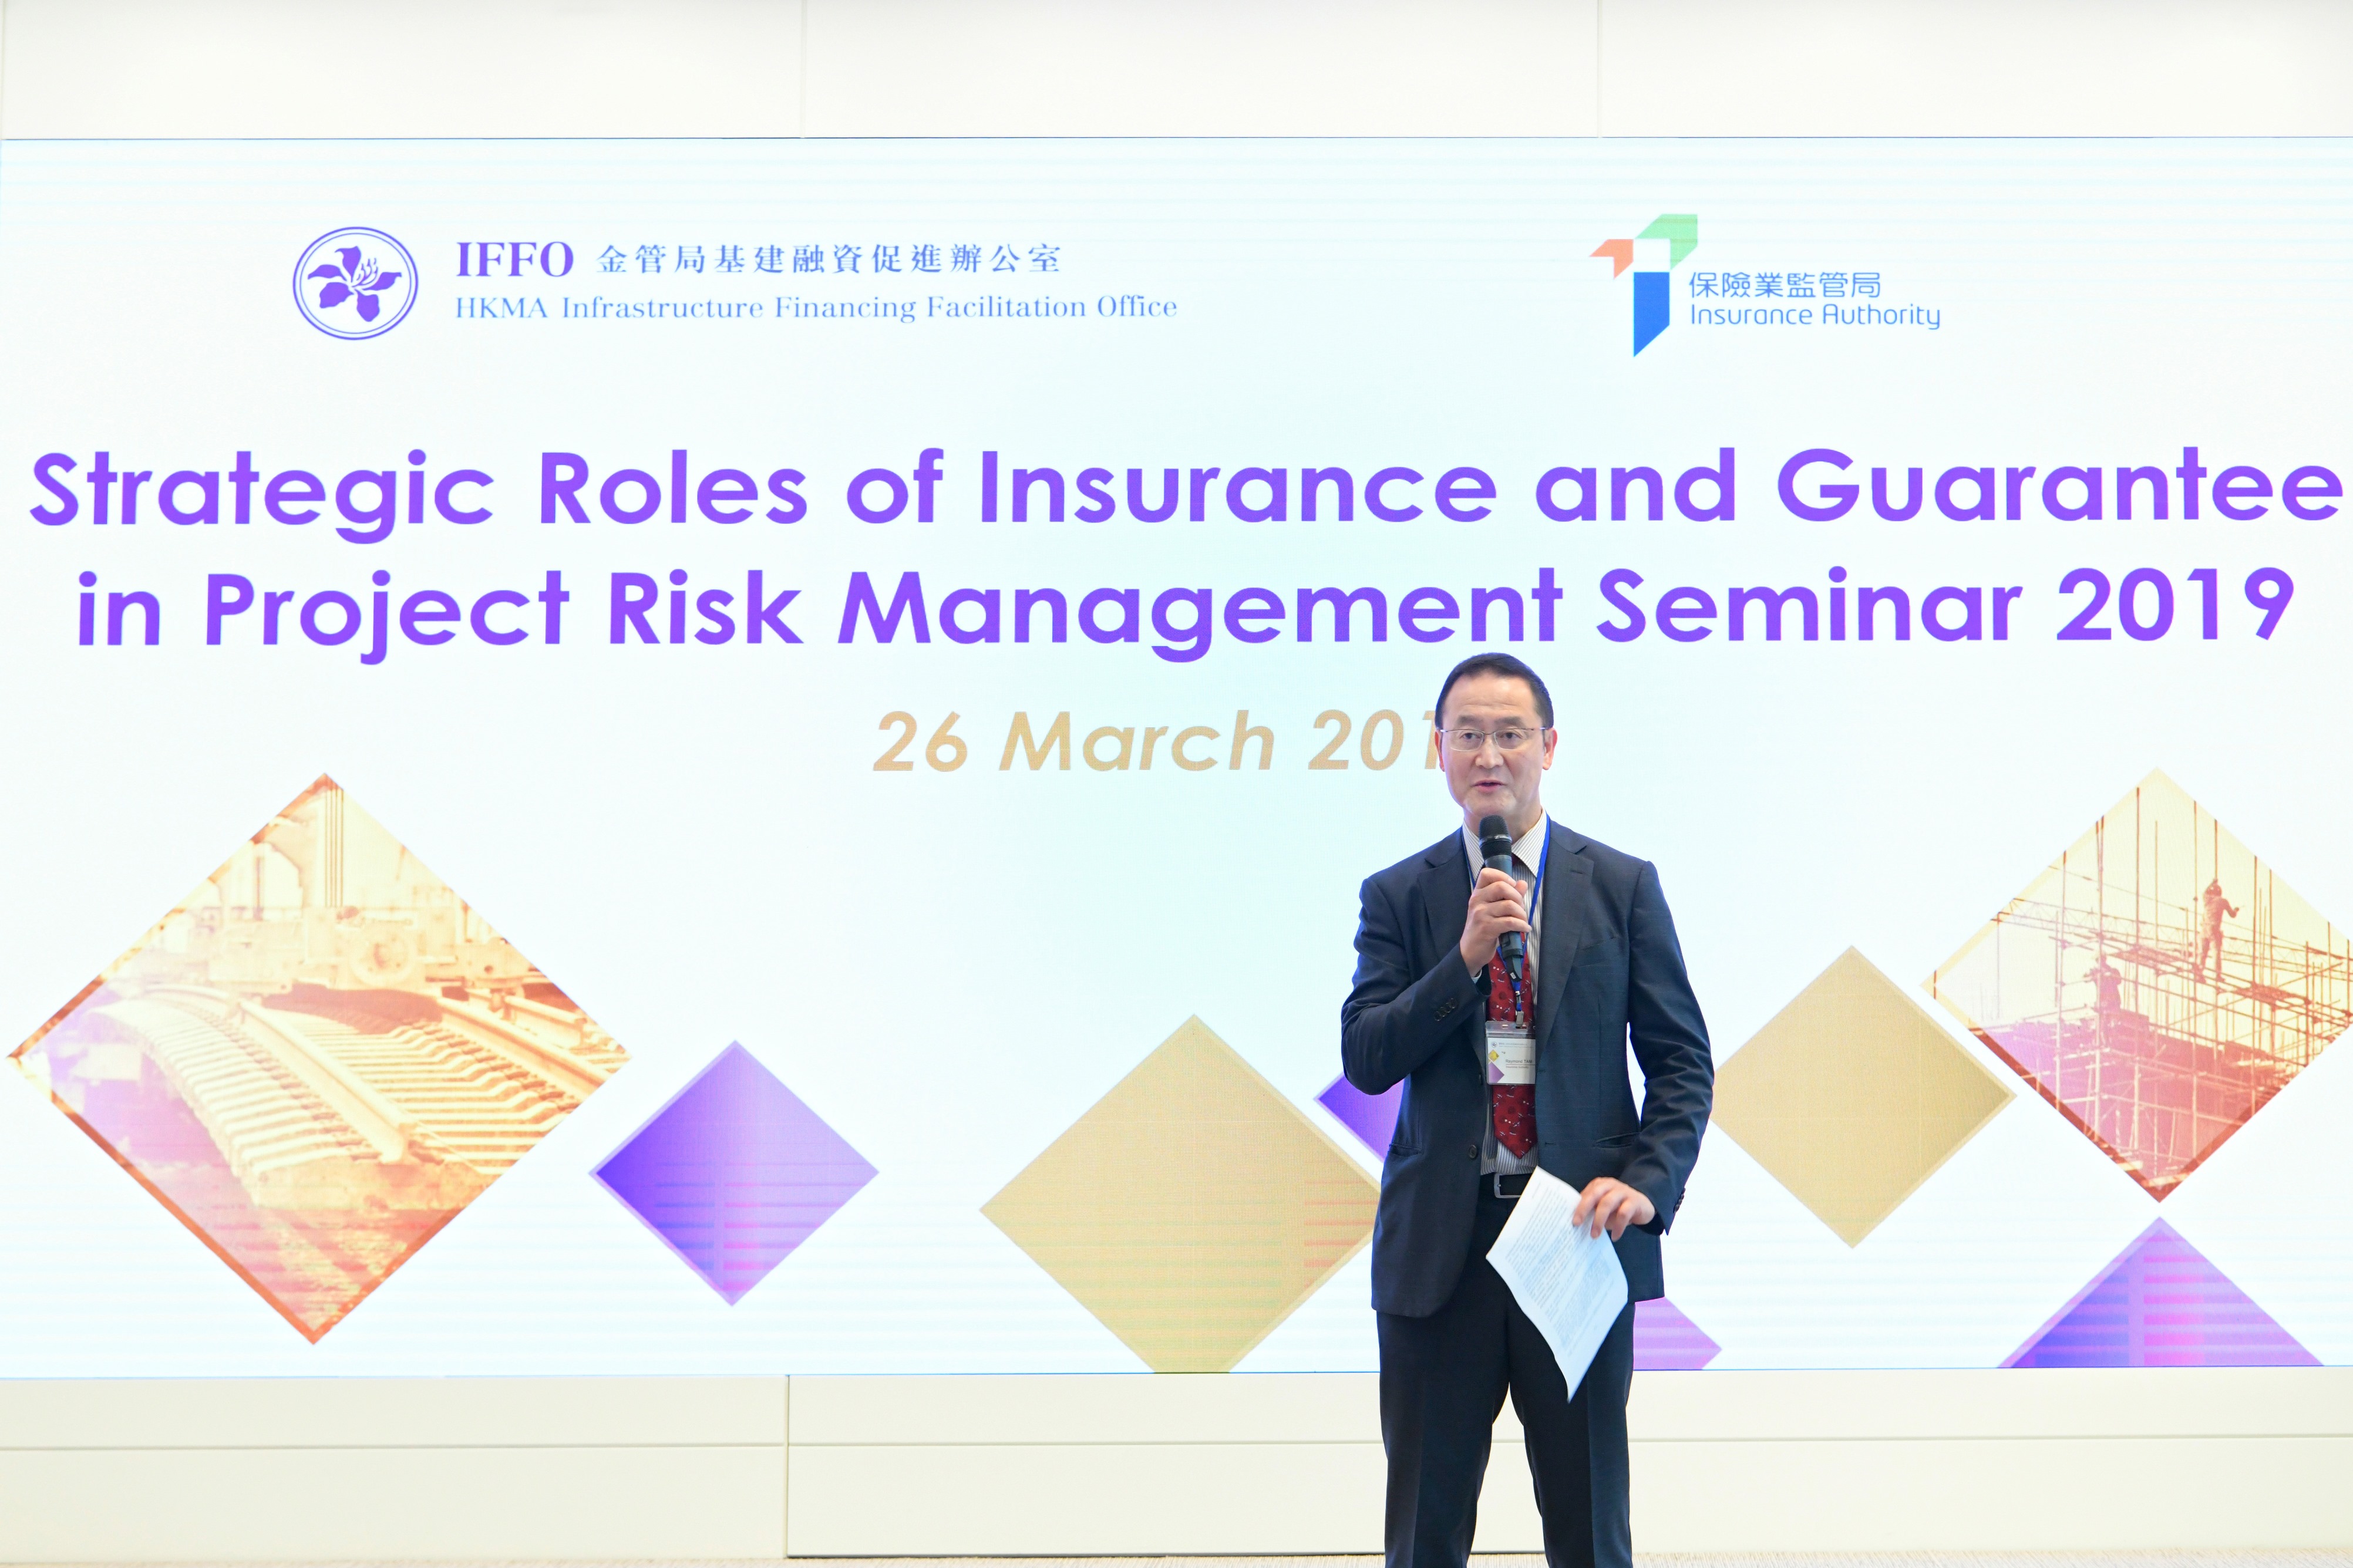 Mr Raymond Tam, Executive Director (Policy and Development) of the IA, gives welcome remarks at the seminar and talks about how the insurance industry can help manage and mitigate risks in complex projects.